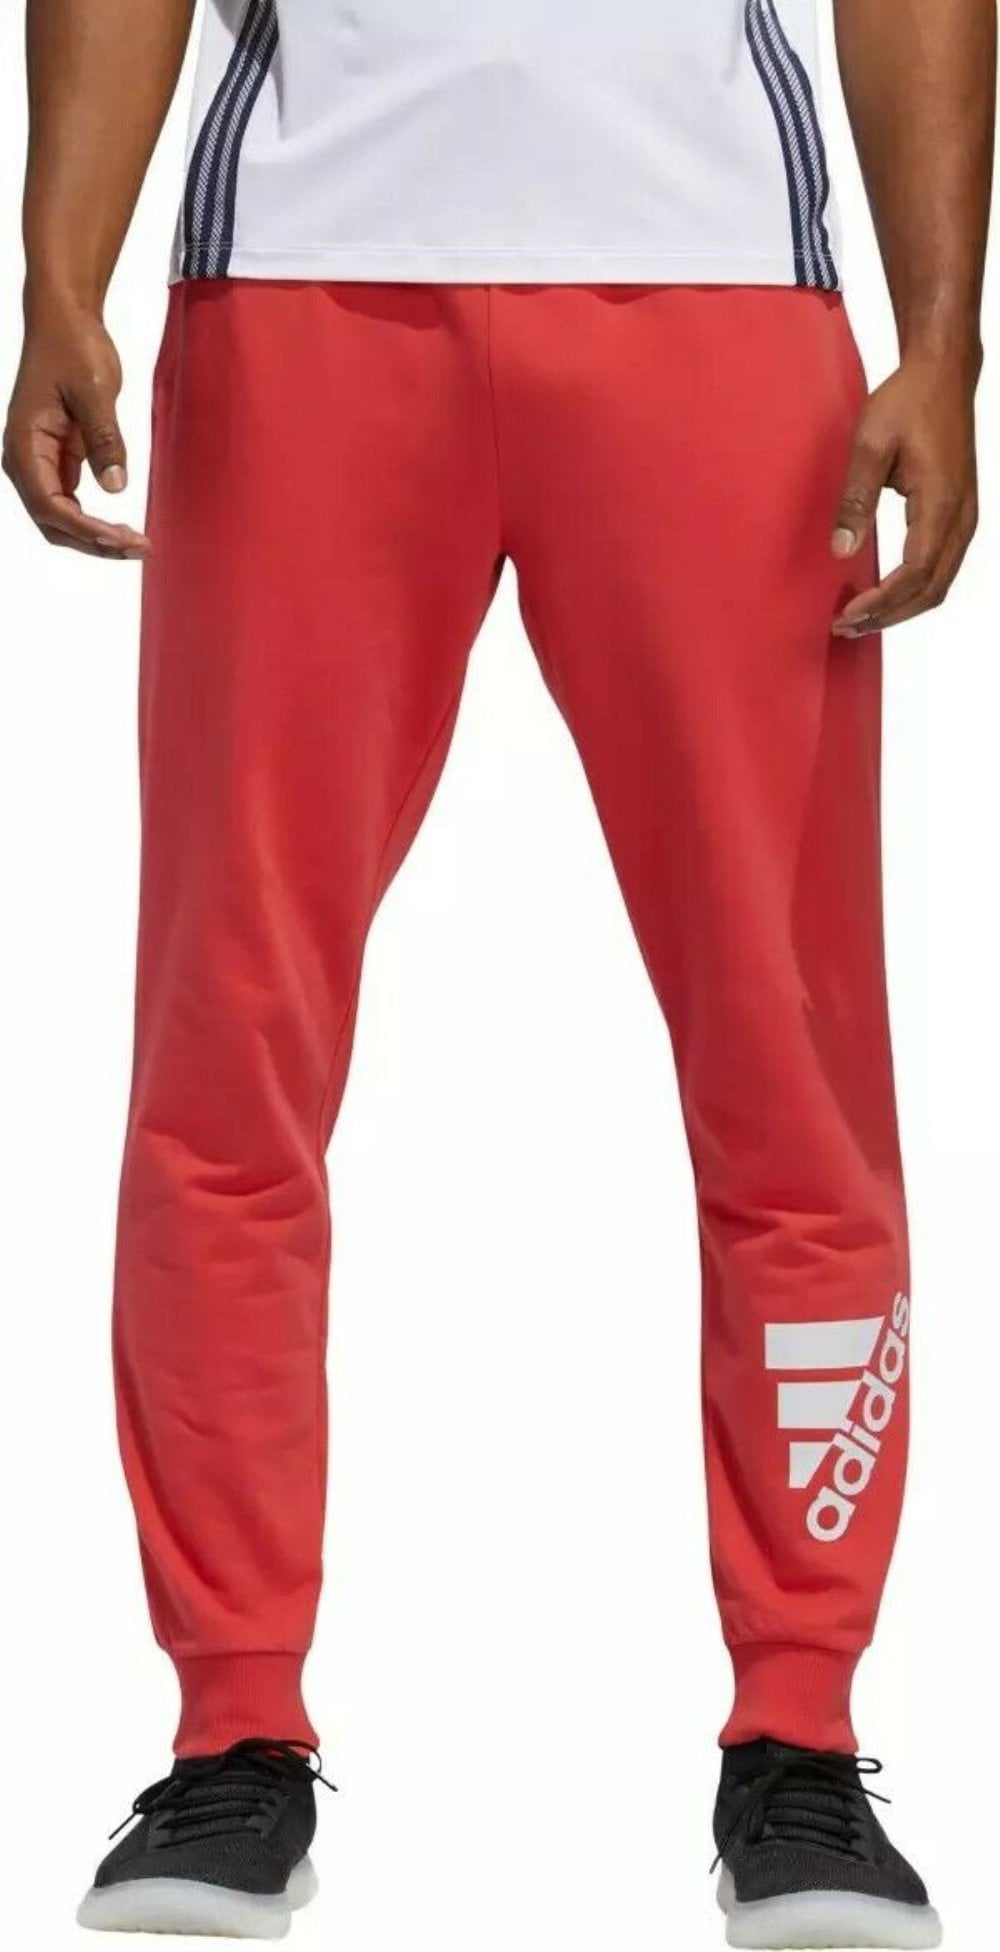 Raise yourself lose Gymnast Adidas Men's Post Game Lite French Terry Joggers Pants, Glory Red -  Walmart.com